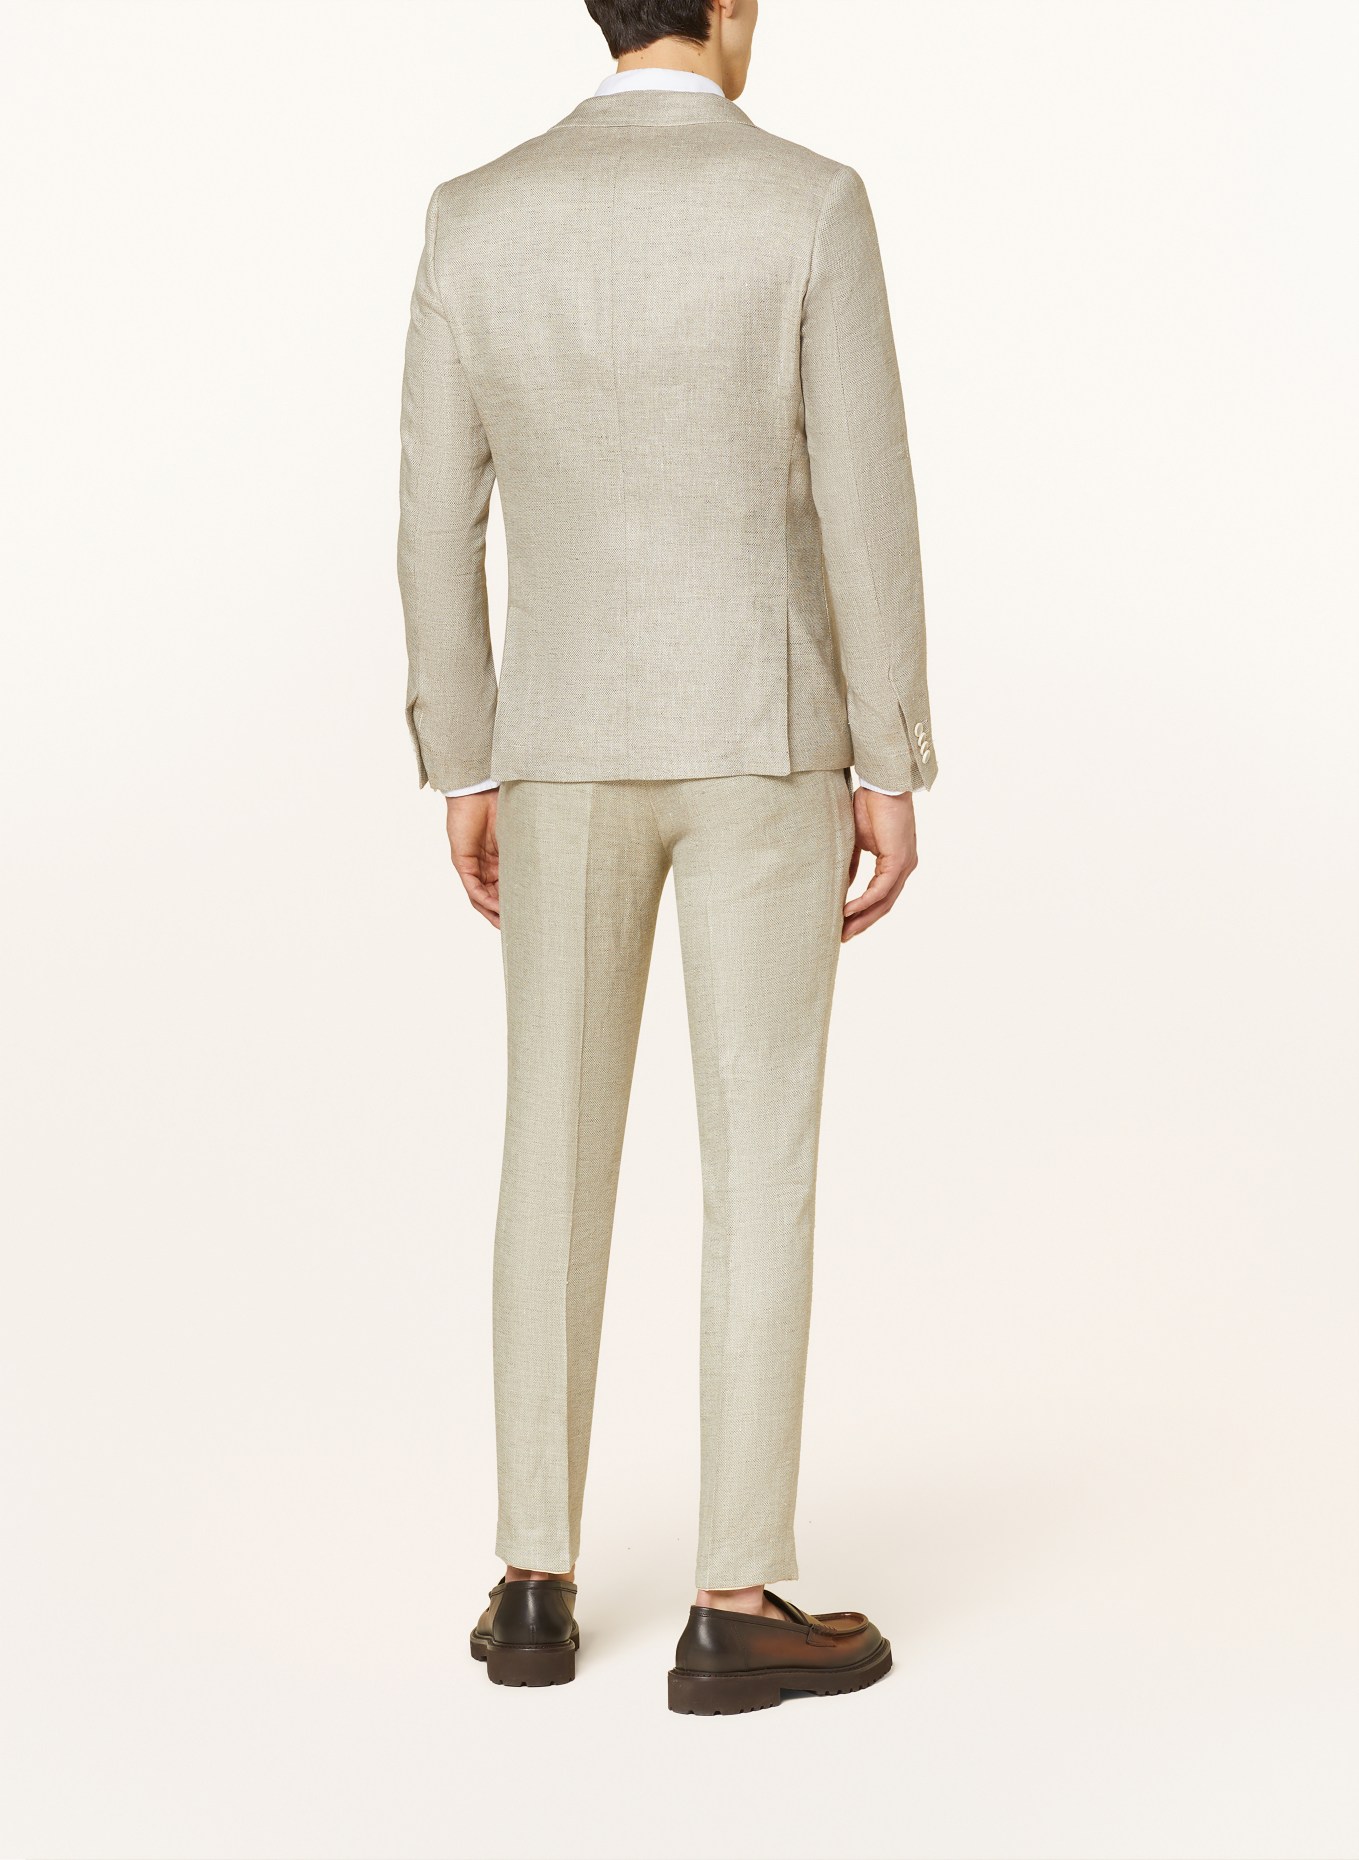 CG - CLUB of GENTS Suit jacket SG PETERSON slim fit with linen, Color: 21 HELLBEIGE (Image 4)